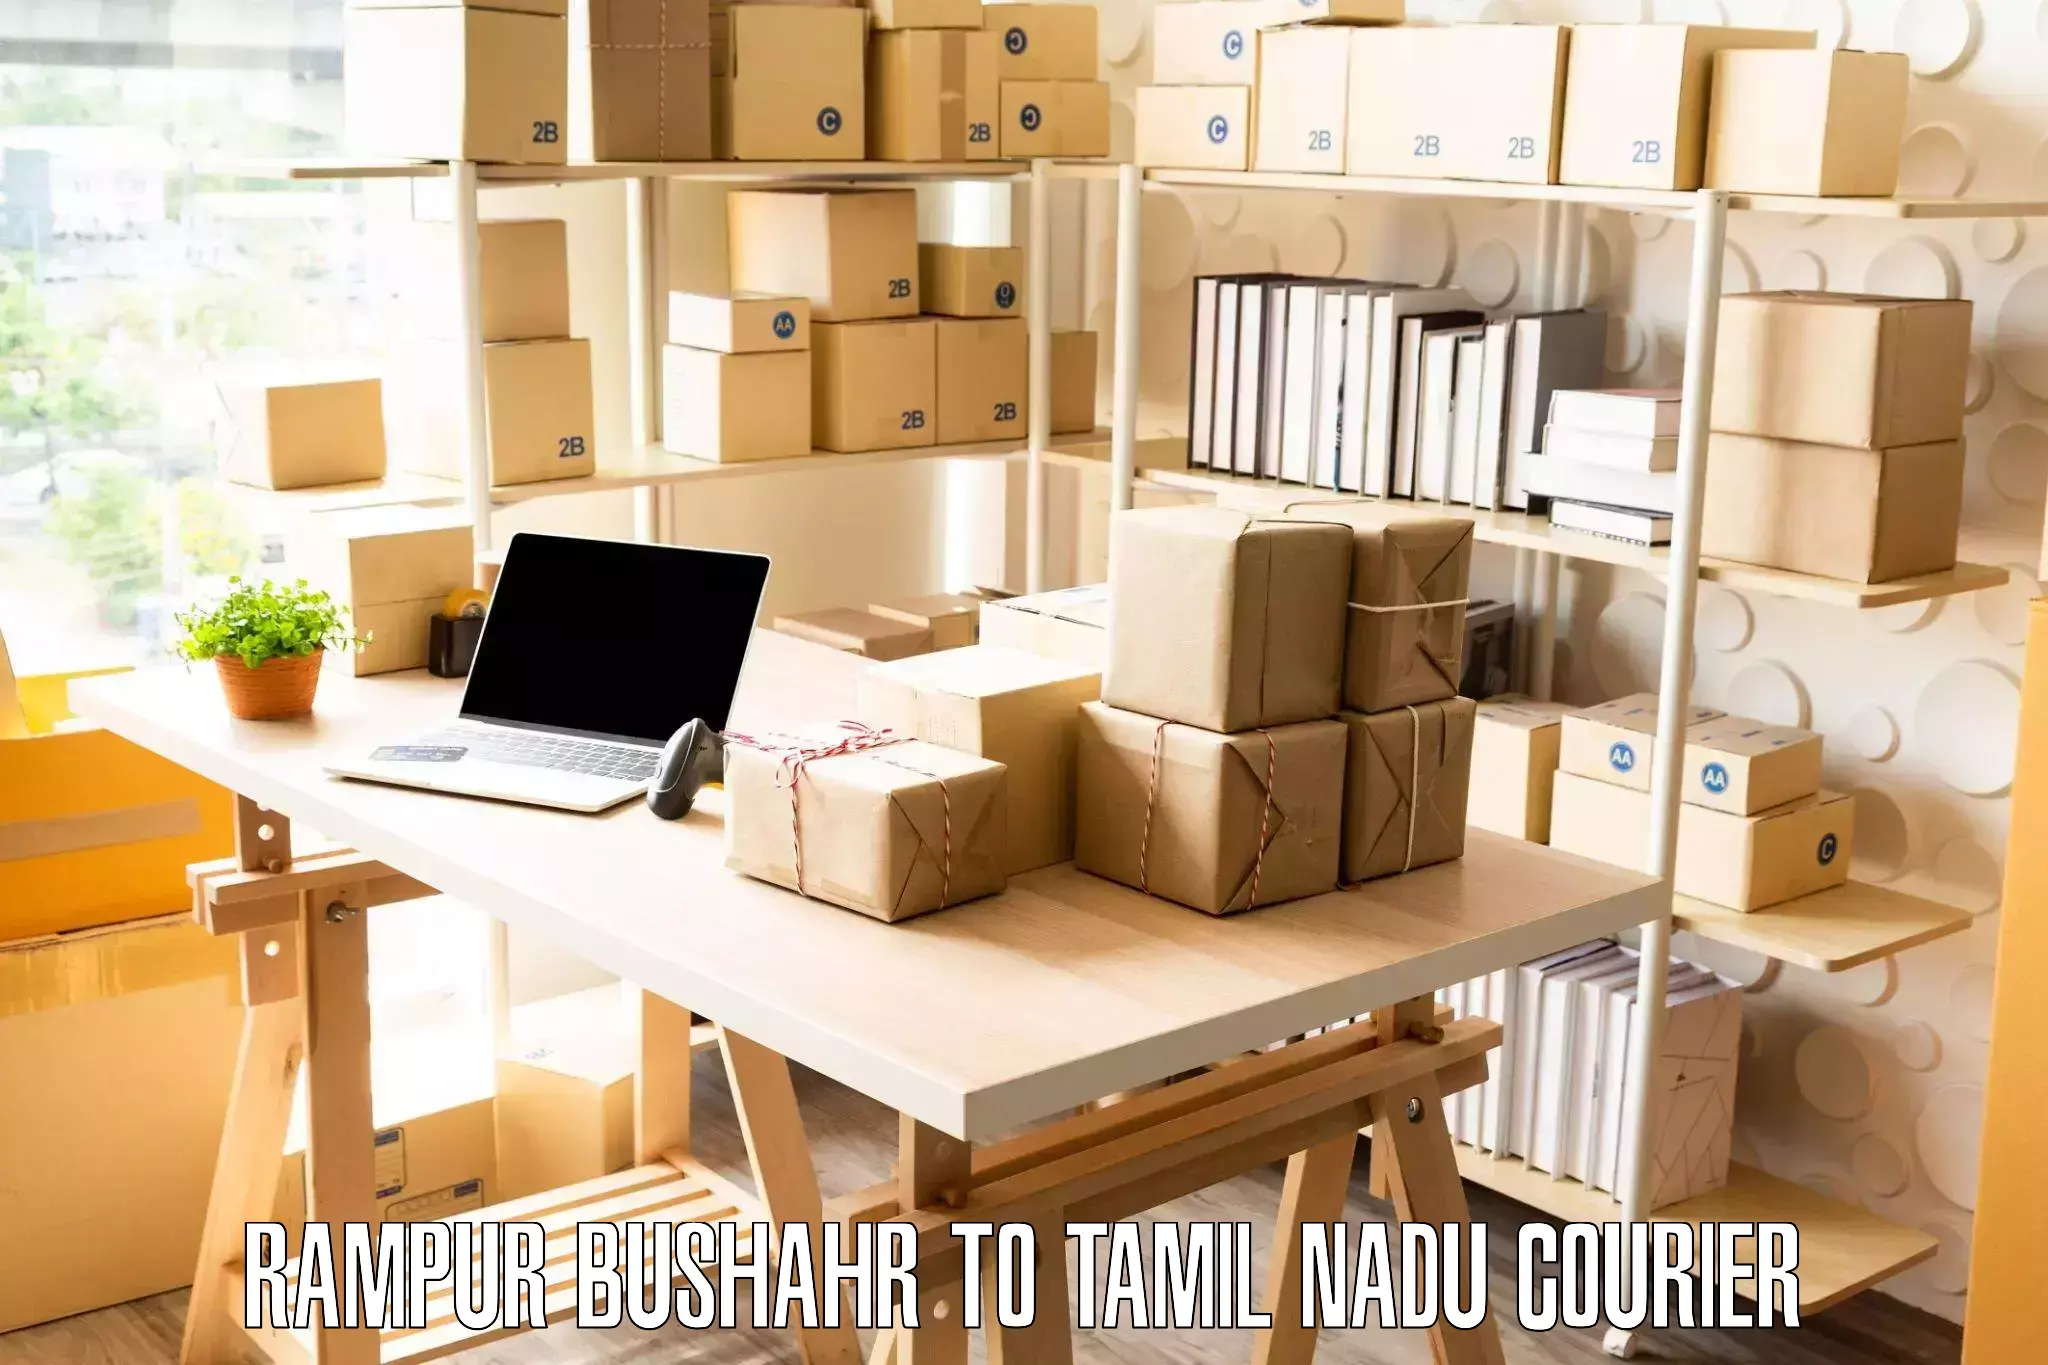 Cost-effective moving solutions Rampur Bushahr to Papanasam